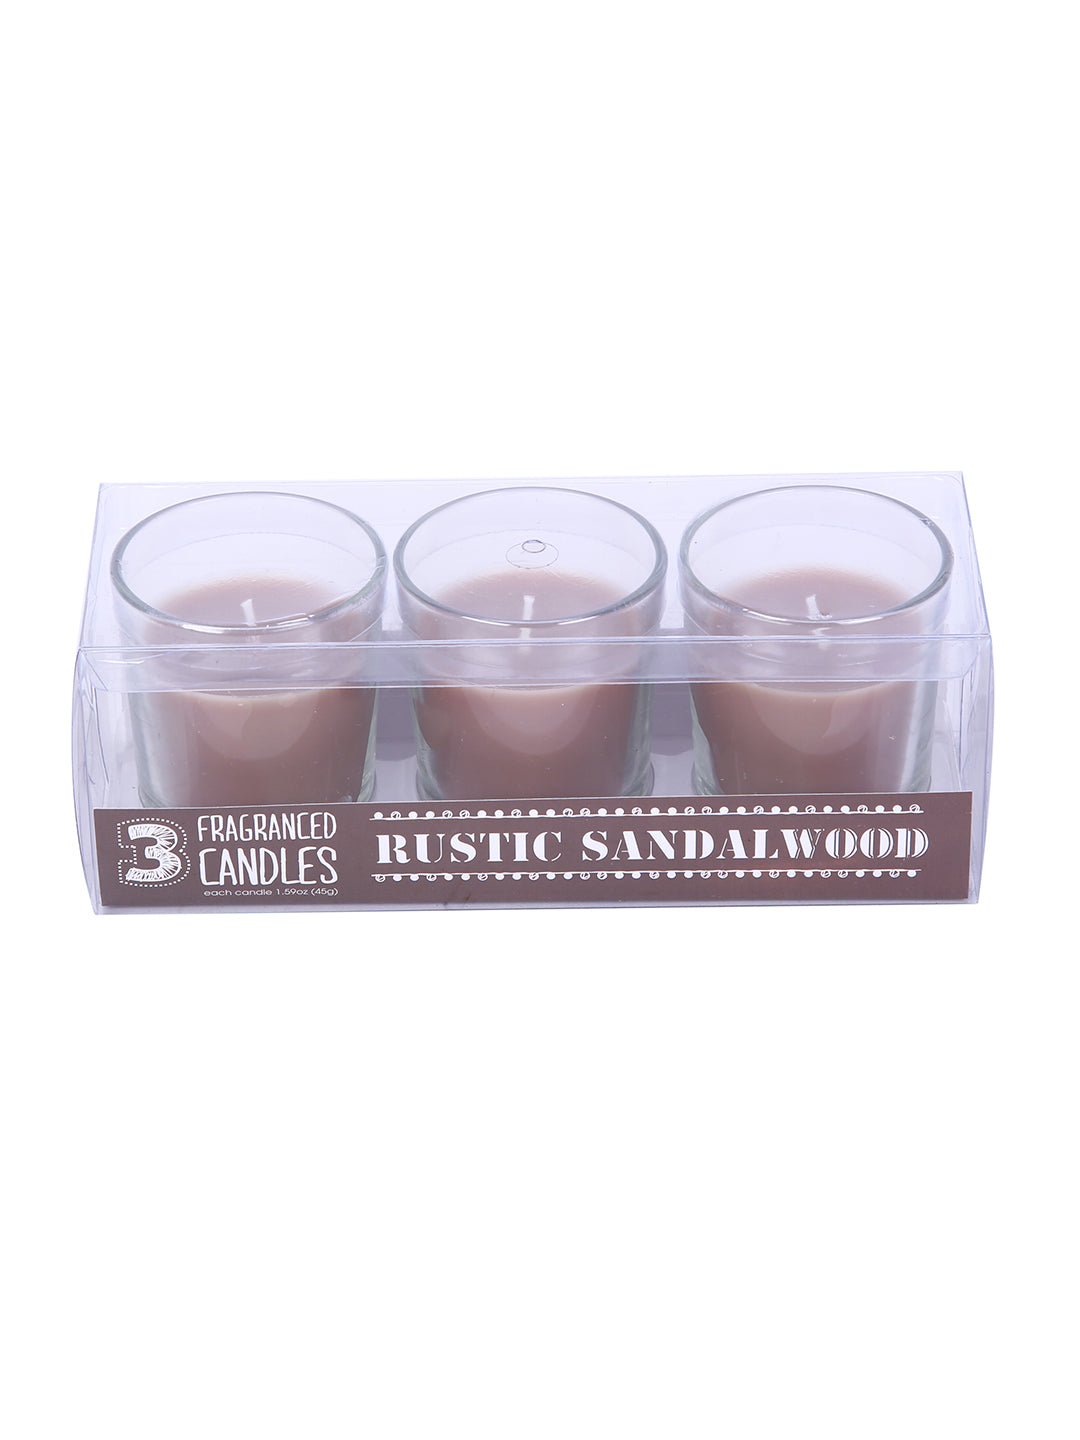 Set of 3 Hosley® Highly Fragranced Rustic Sandalwood Filled Glass Candles, 1.6 Oz wax each